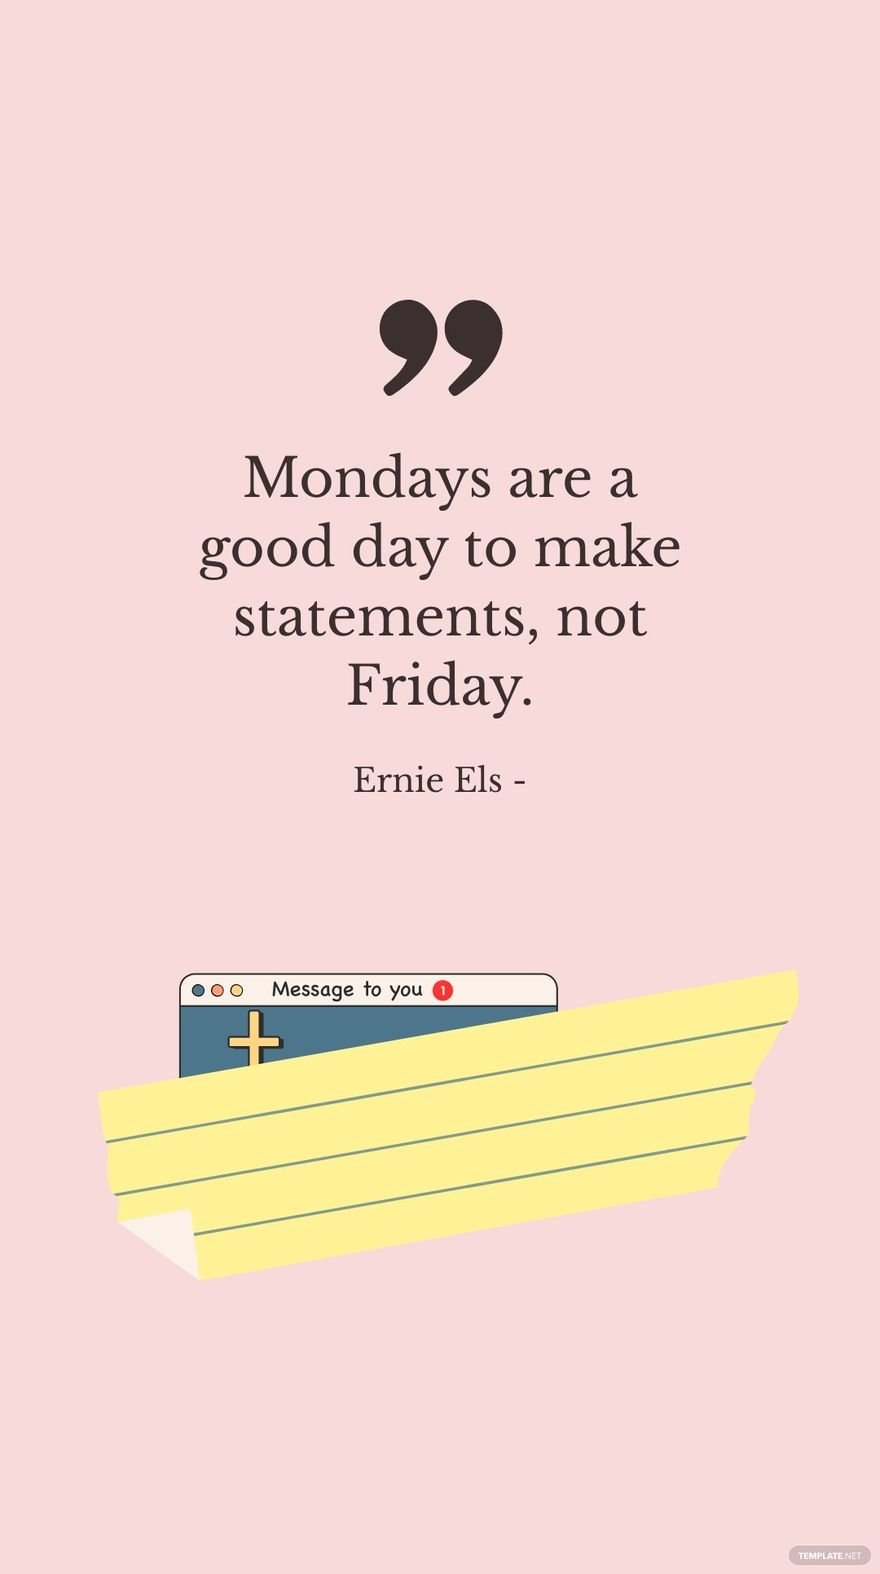 Ernie Els - Mondays are a good day to make statements, not Friday. in JPG